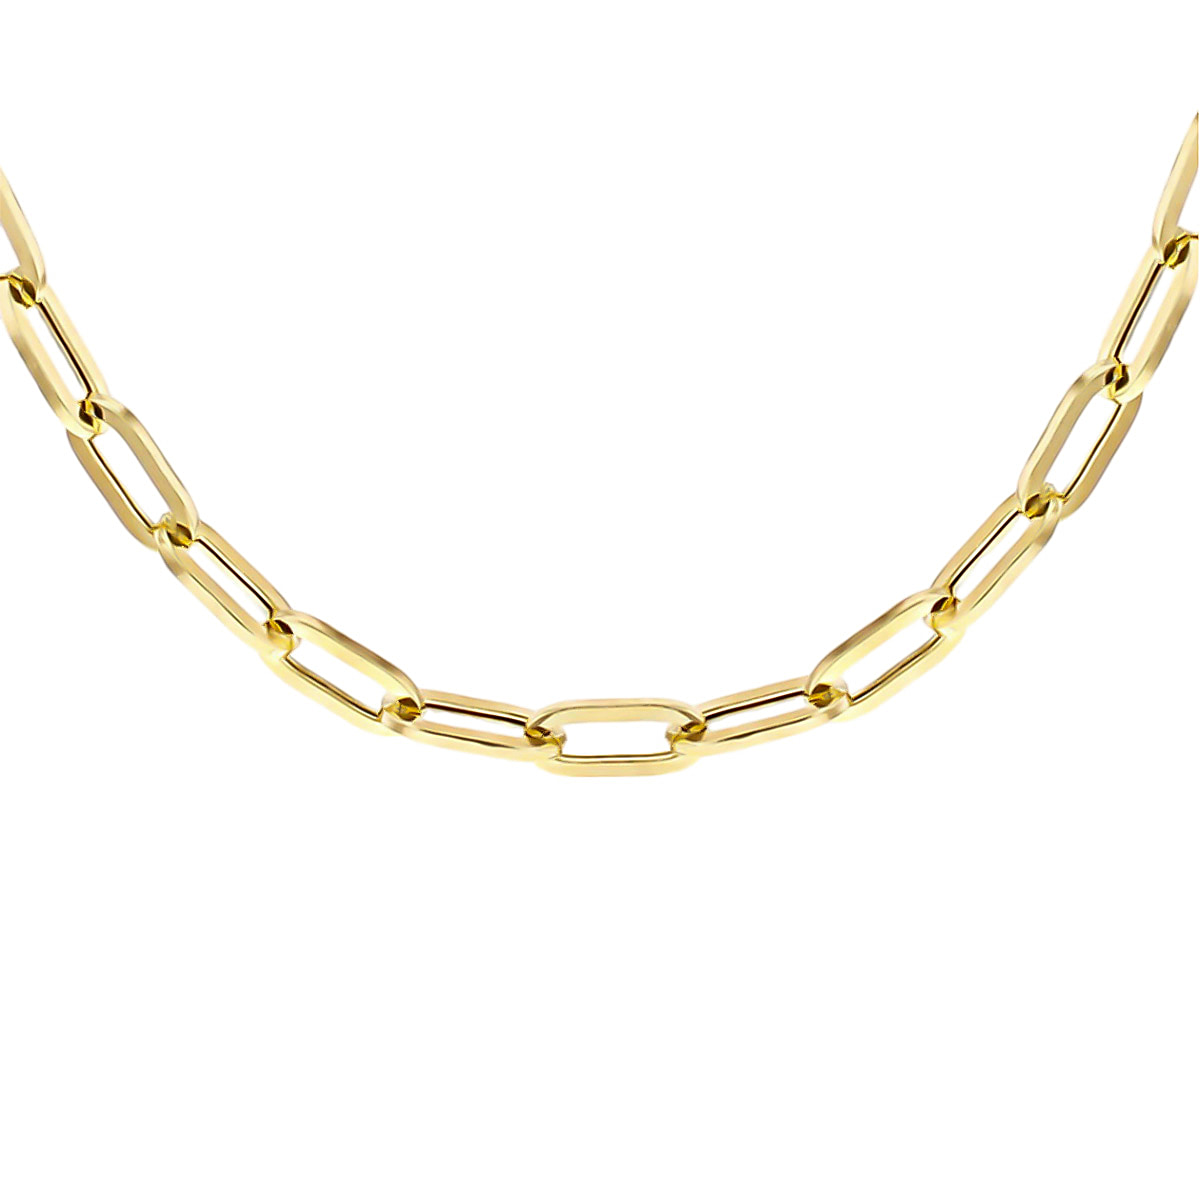 Hatton Garden Closeout - 9K Yellow Gold Paper Clip Necklace (Size - 30), Gold Wt. 13.10 Gms